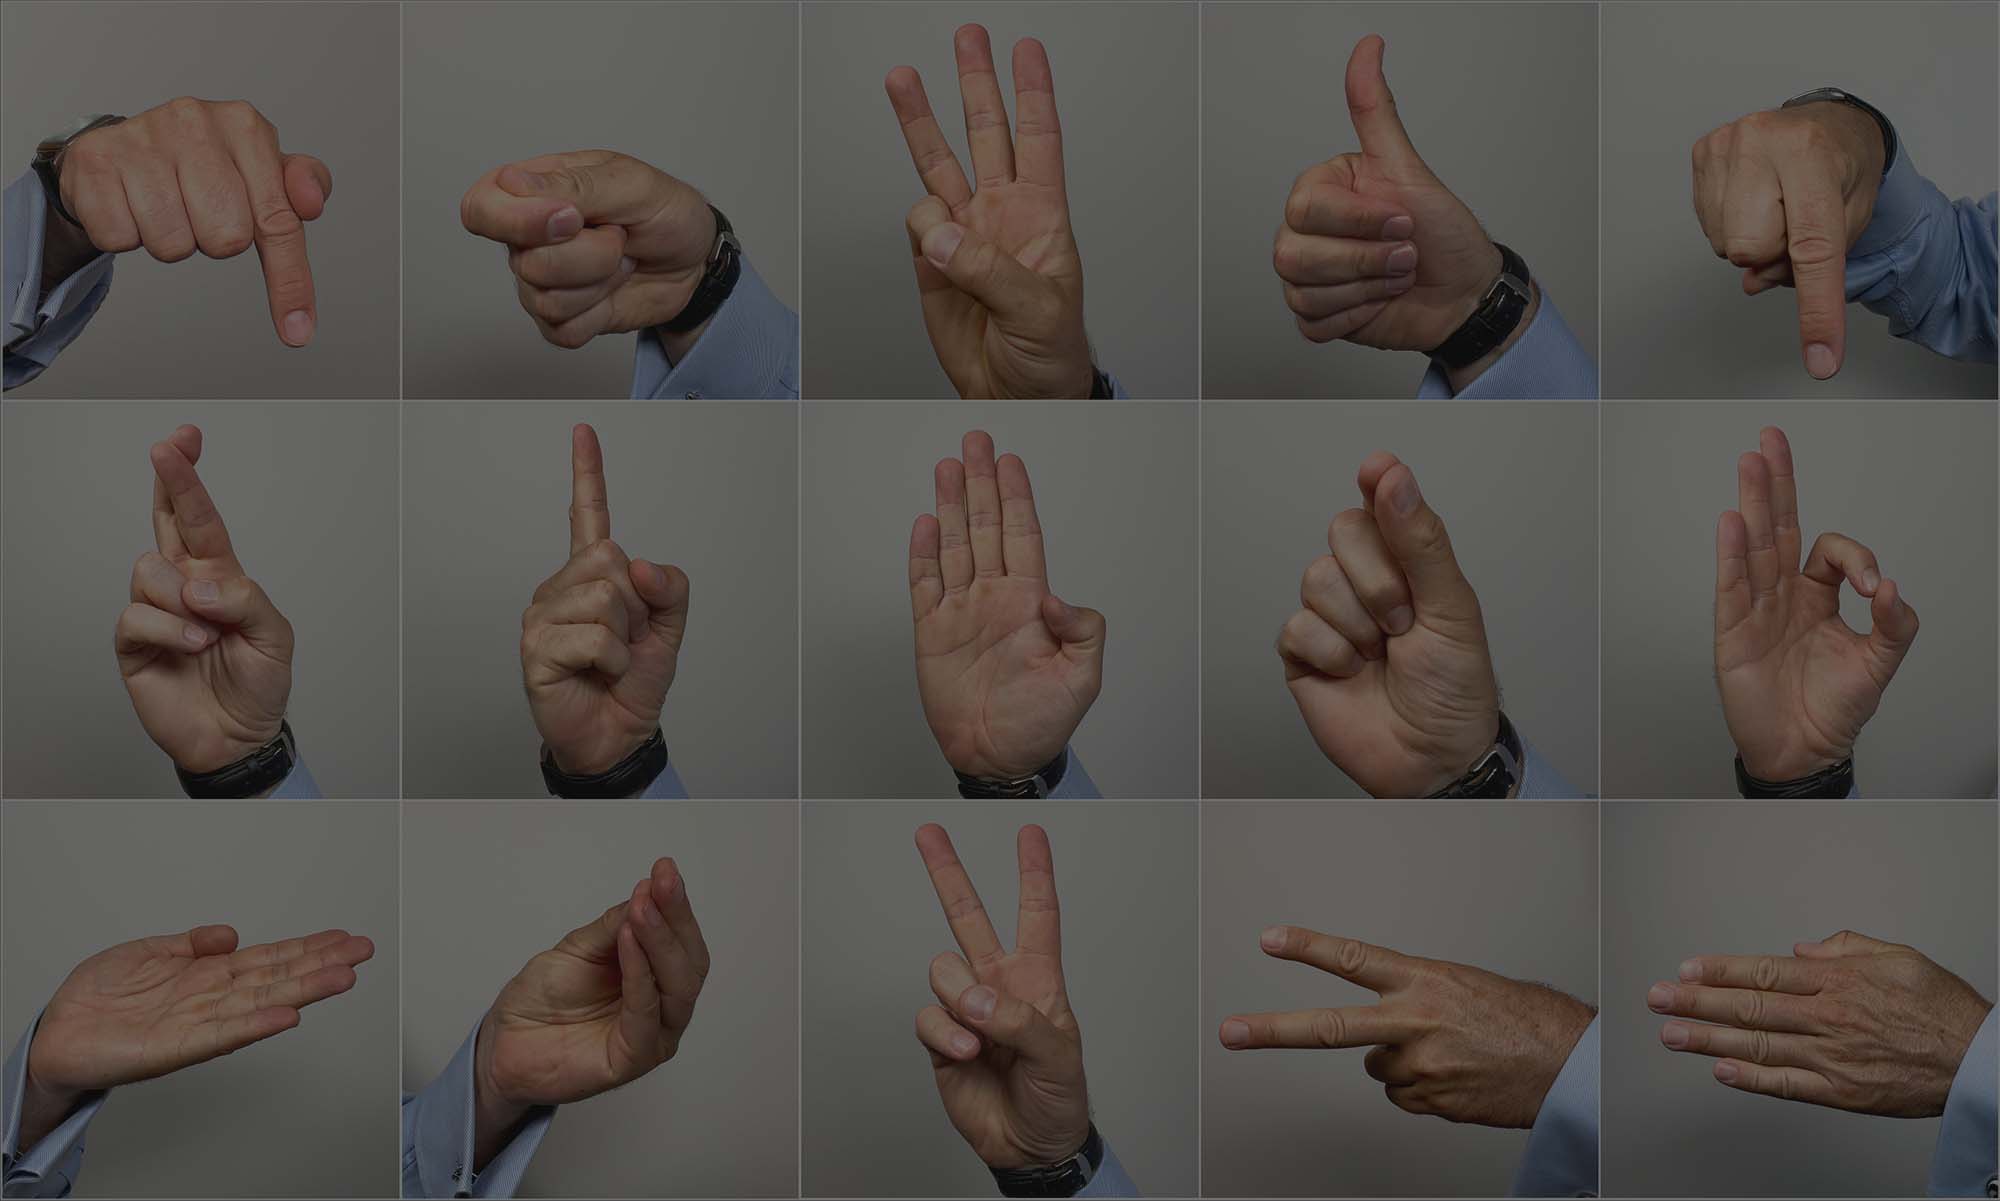 Hands showing body language examples